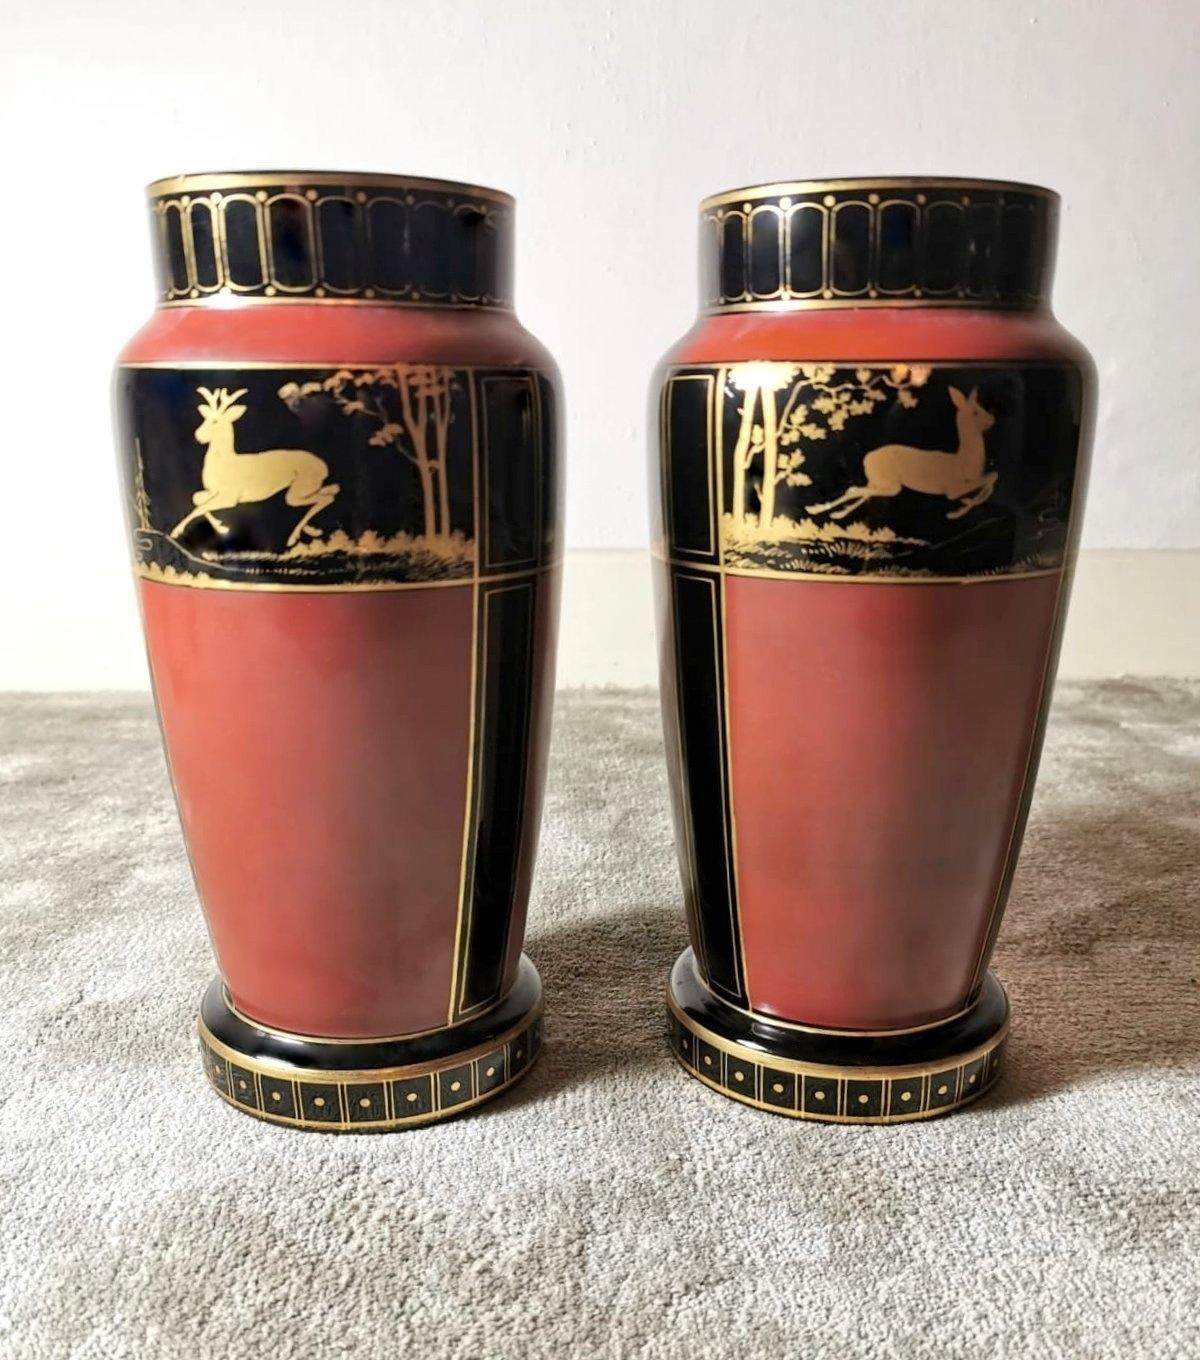 We kindly suggest you read the whole description, because with it we try to give you detailed technical and historical information to guarantee the authenticity of our objects.
Wonderful pair of Art Deco vases in shiny black opaline glass; the